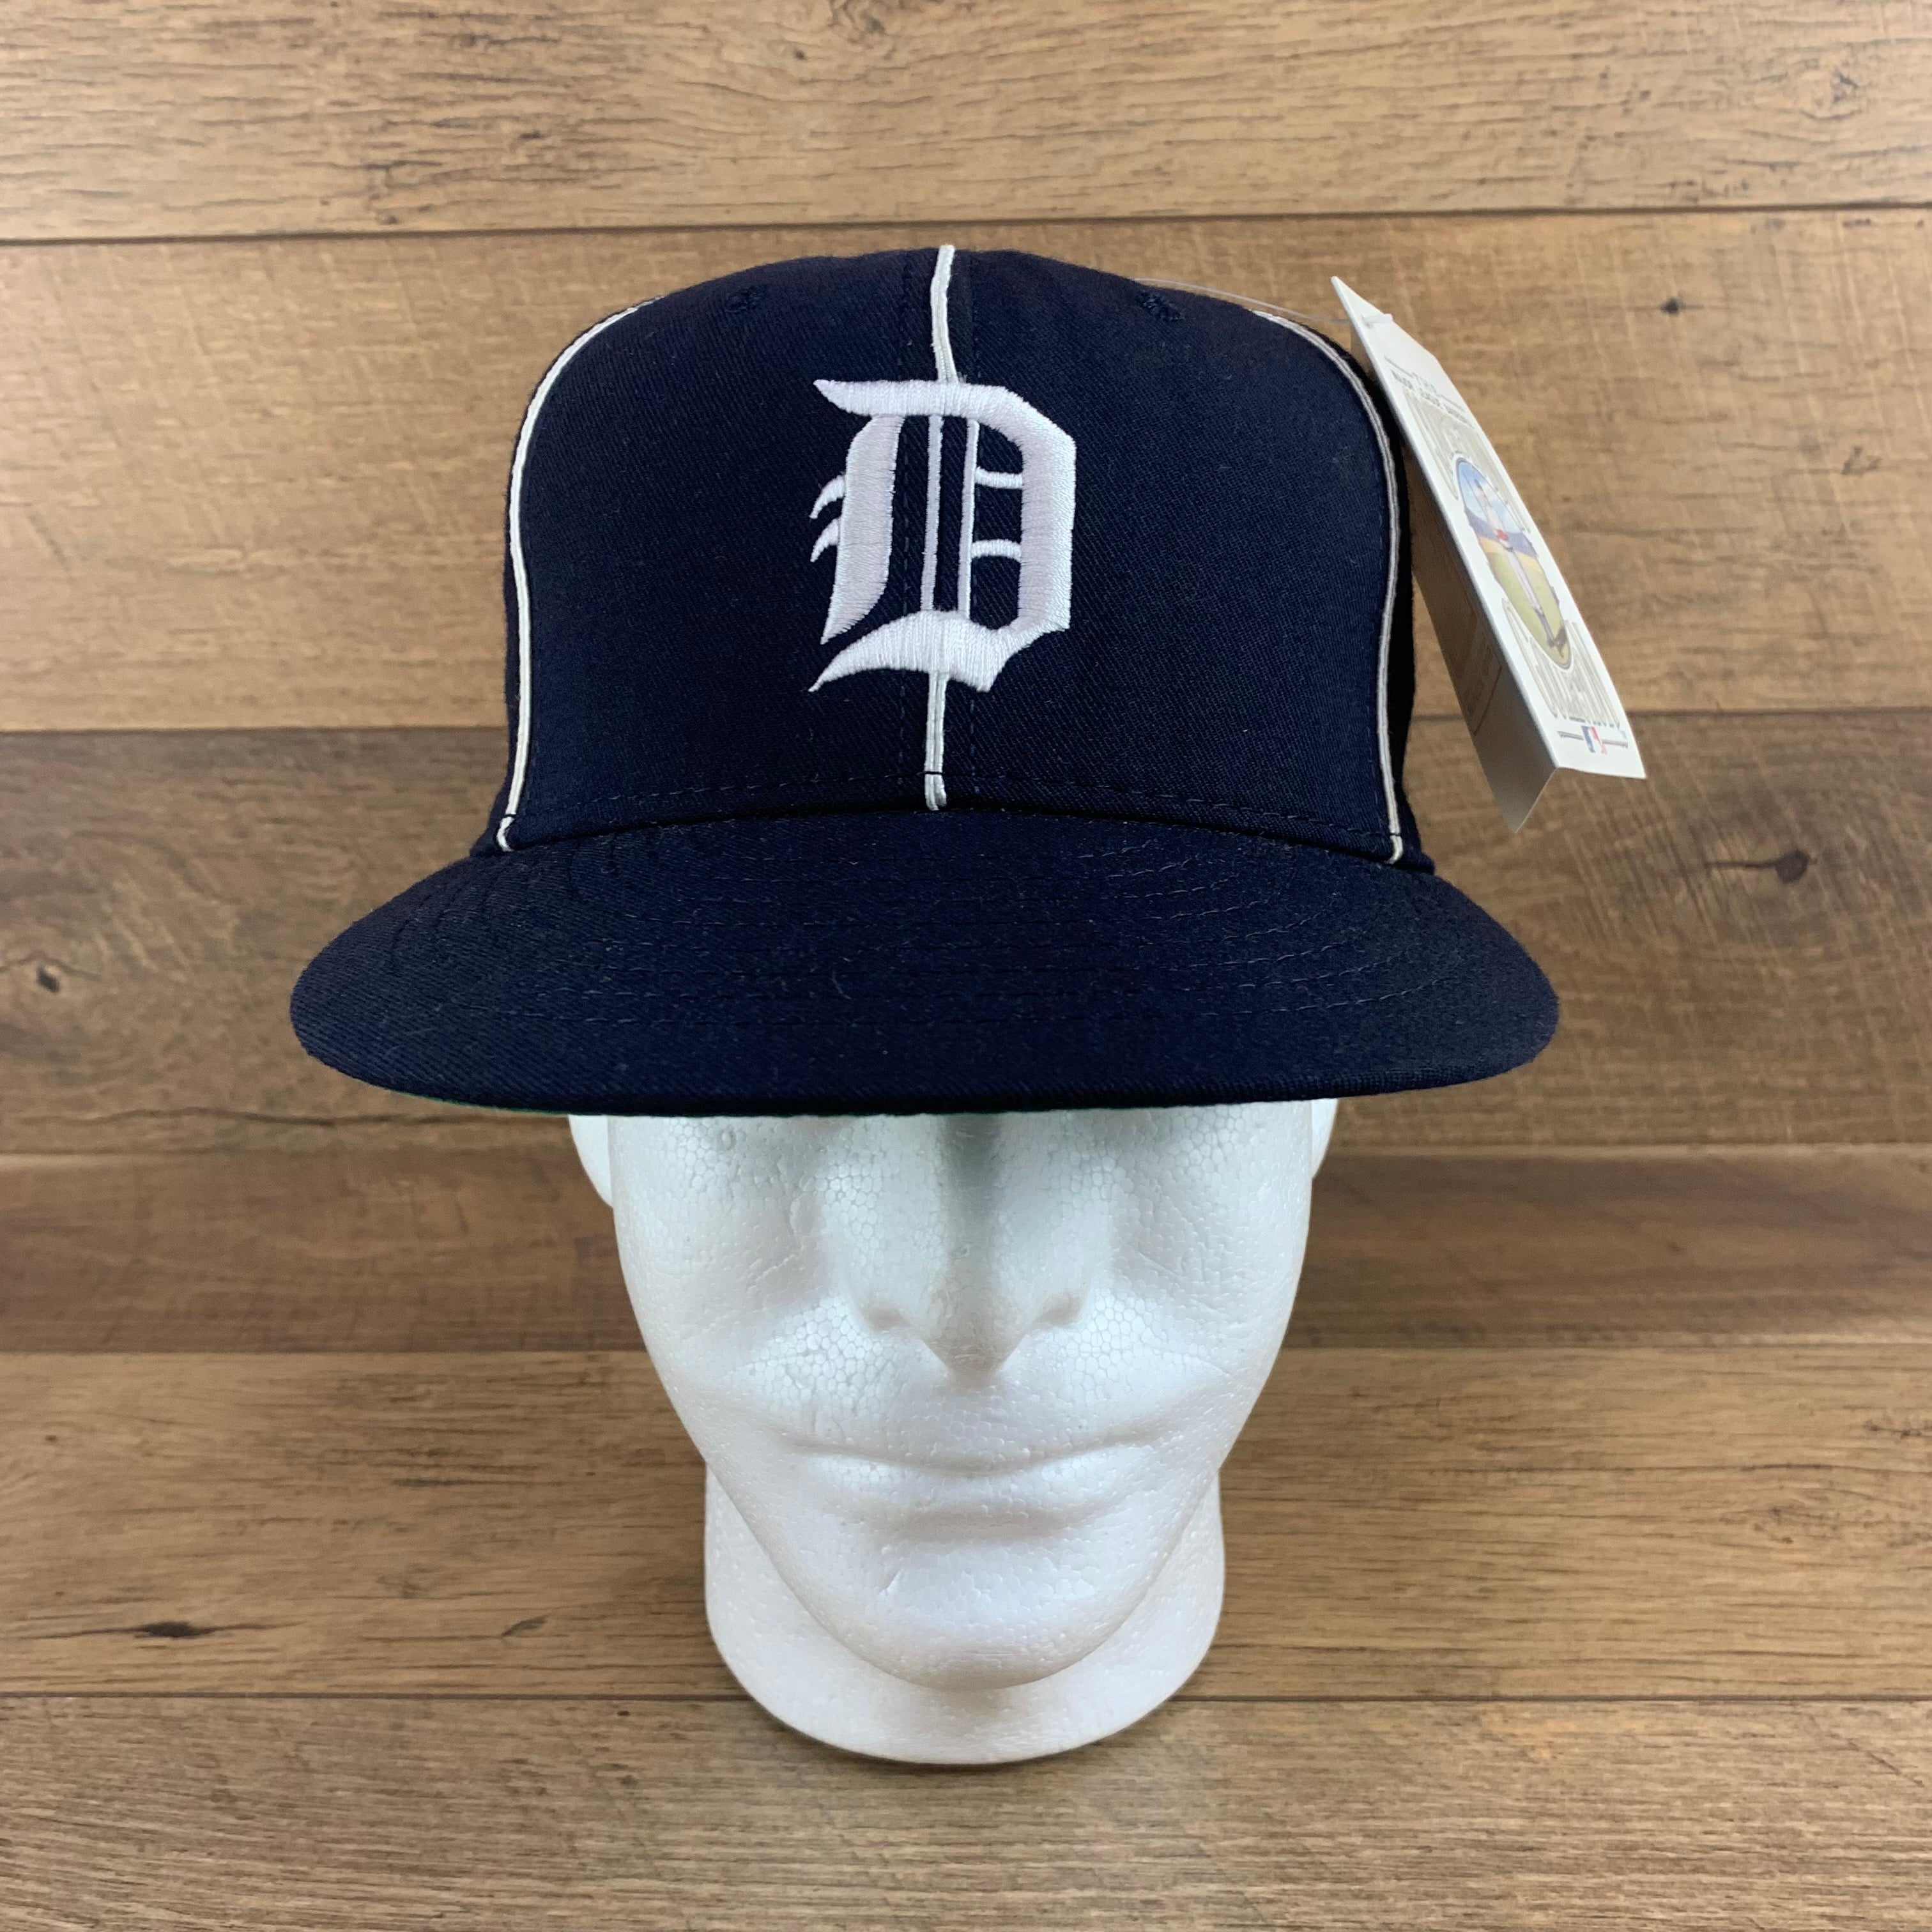 VINTAGE The Game Detroit Tigers Hat Cap Size 7 3/8 Fitted Black